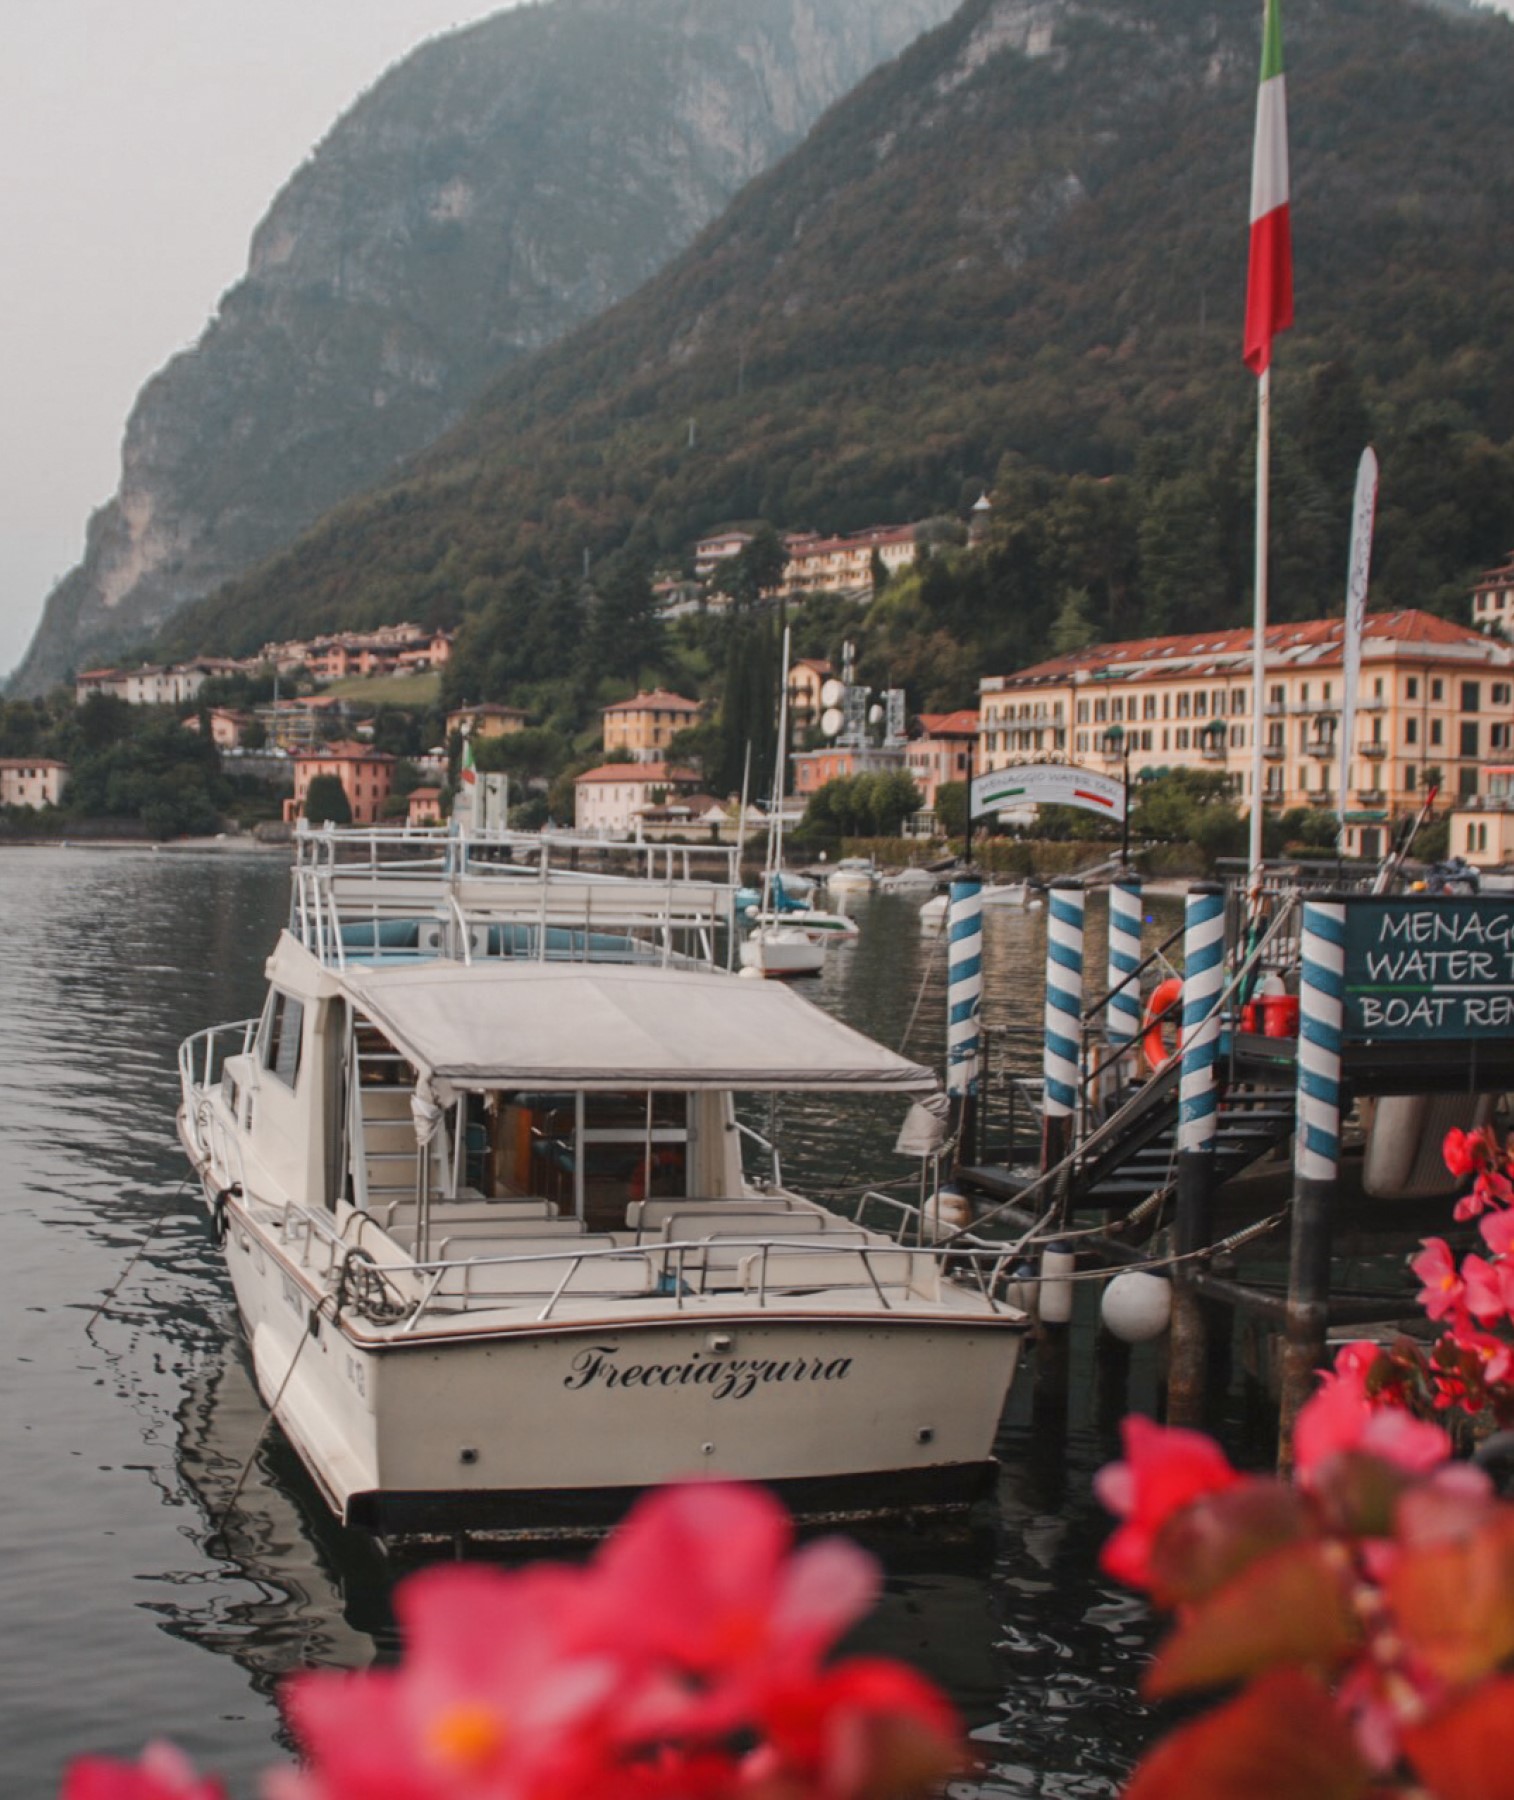 How to Spend 3 Picturesque Days in Lake Como | lifestyletraveler.co | IG: @lifestyletraveler.co